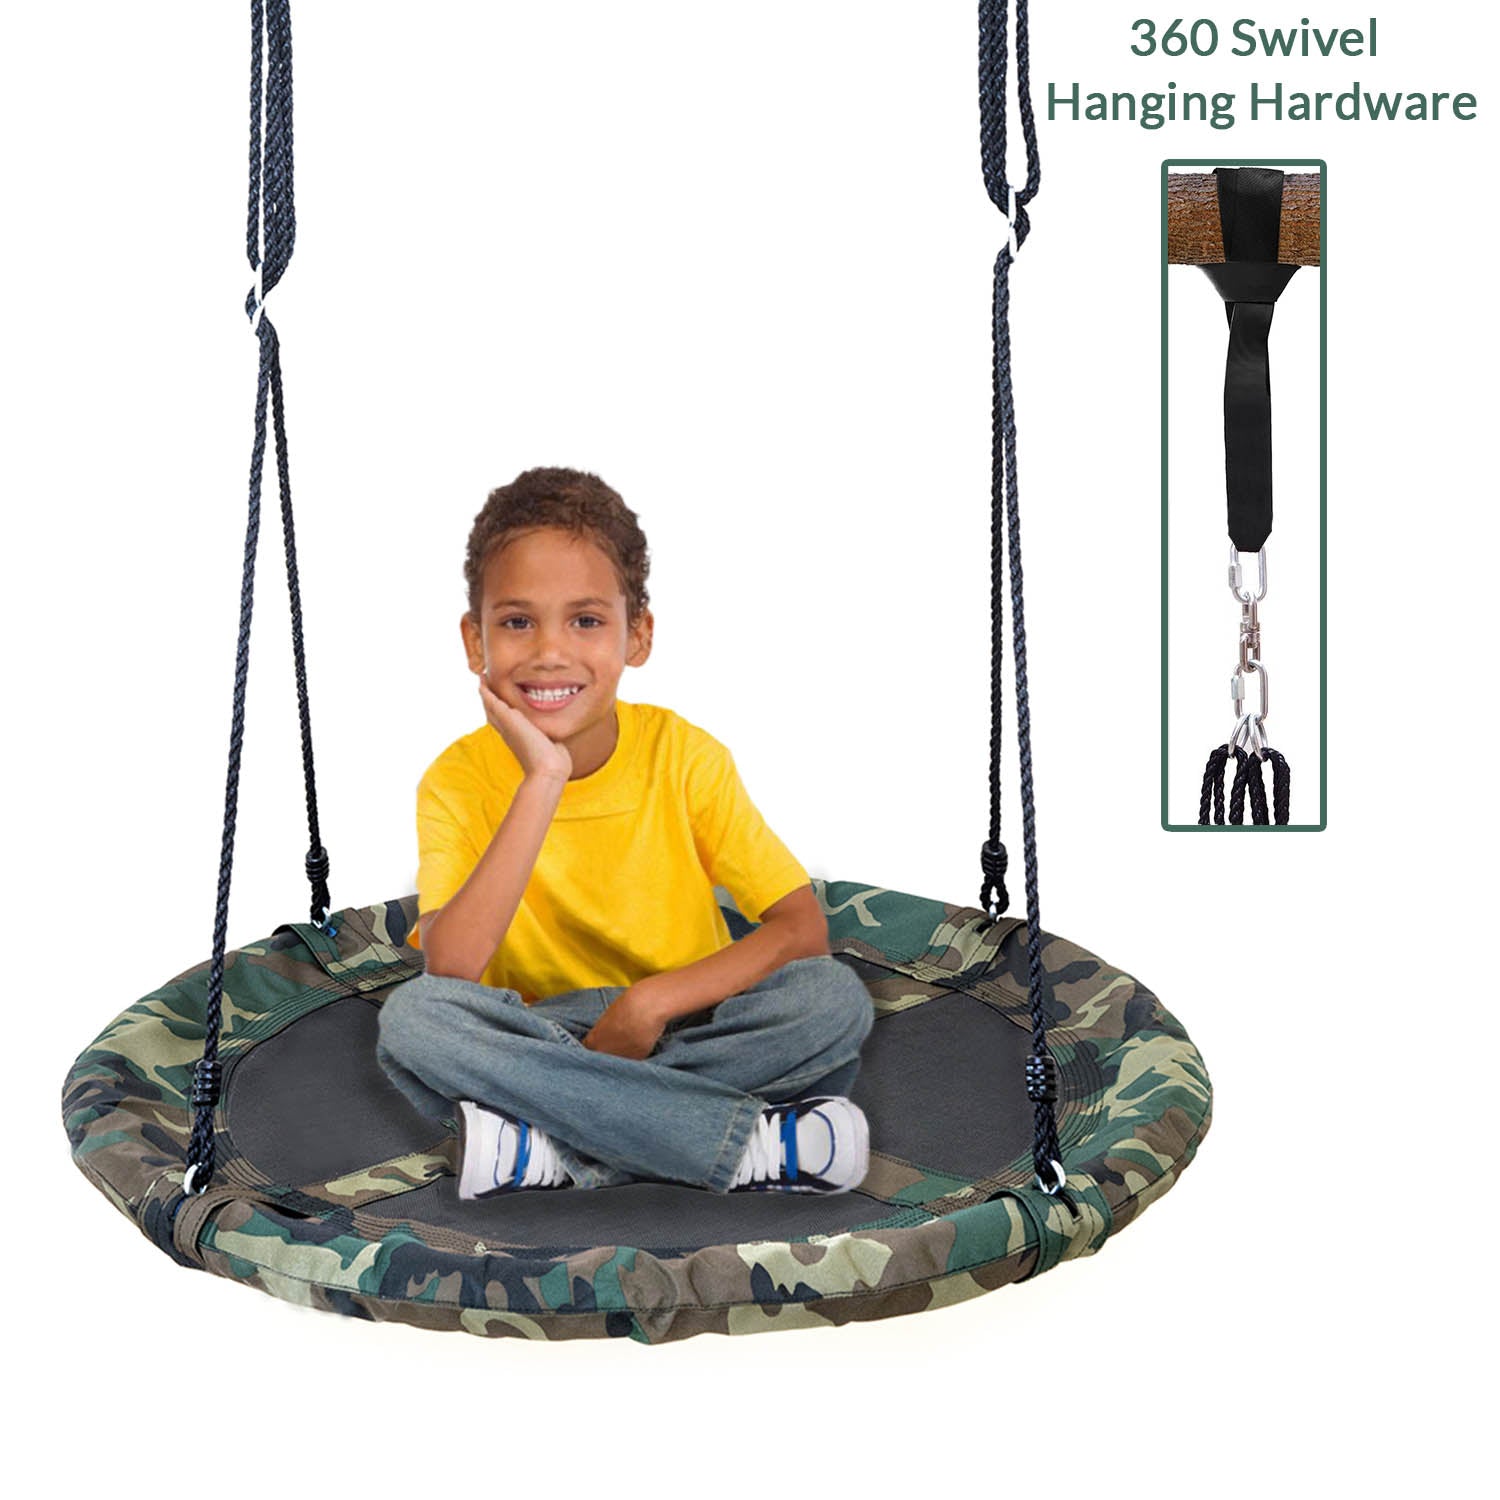 Clevr 40 Outdoor Saucer Kids Tree Tire Swing, Camo